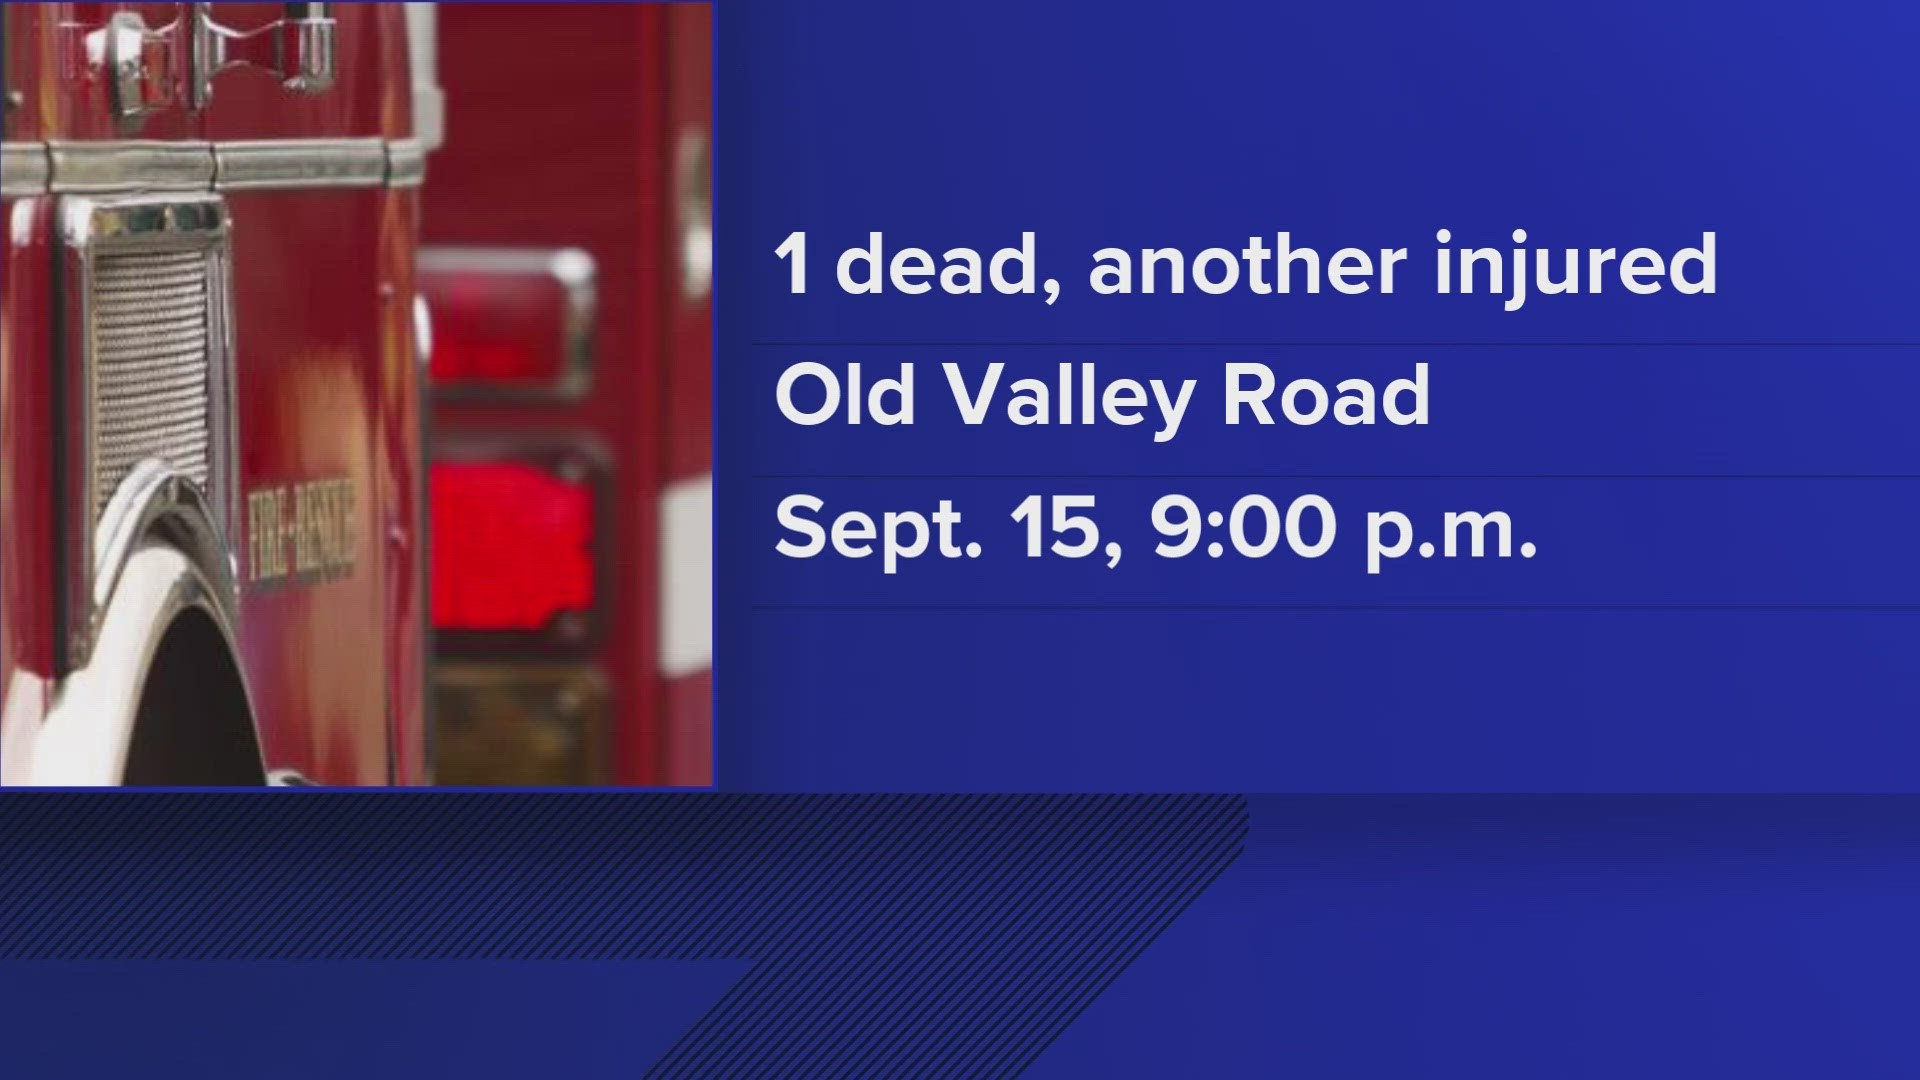 The fire happened Friday night on Old Valley Road resulting in one death and another taken to the hospital.